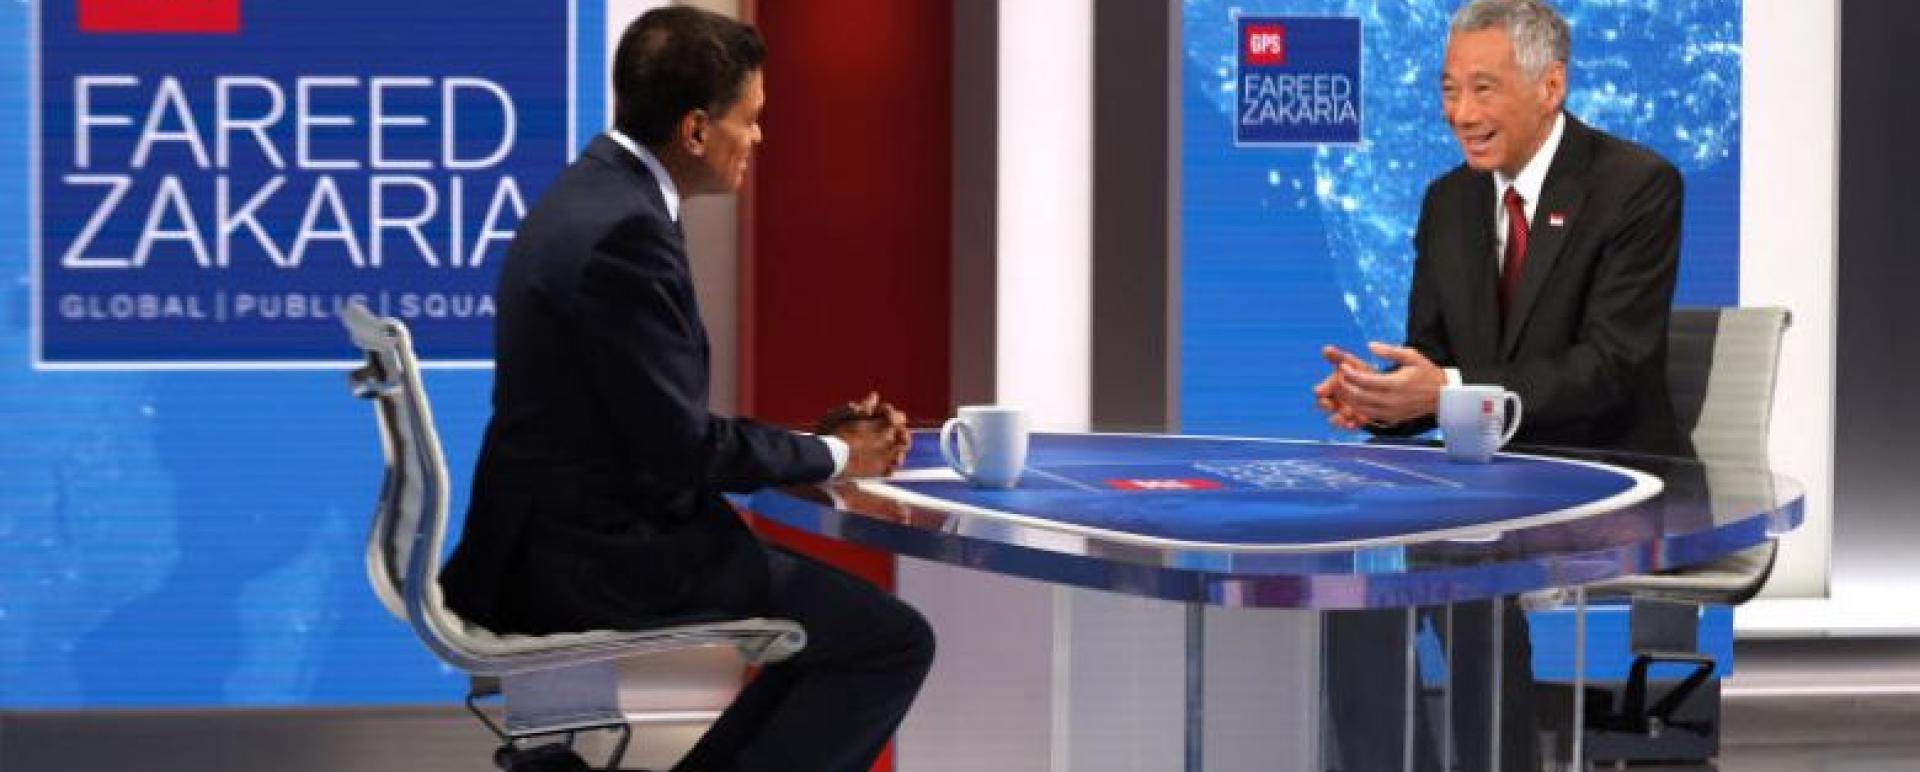 Prime Minister Lee Hsien Loong (right) speaking to US broadcaster CNN's Fareed Zakaria in an interview which aired on Oct 6, 2019.PHOTO: MINISTRY OF COMMUNICATIONS AND INFORMATION